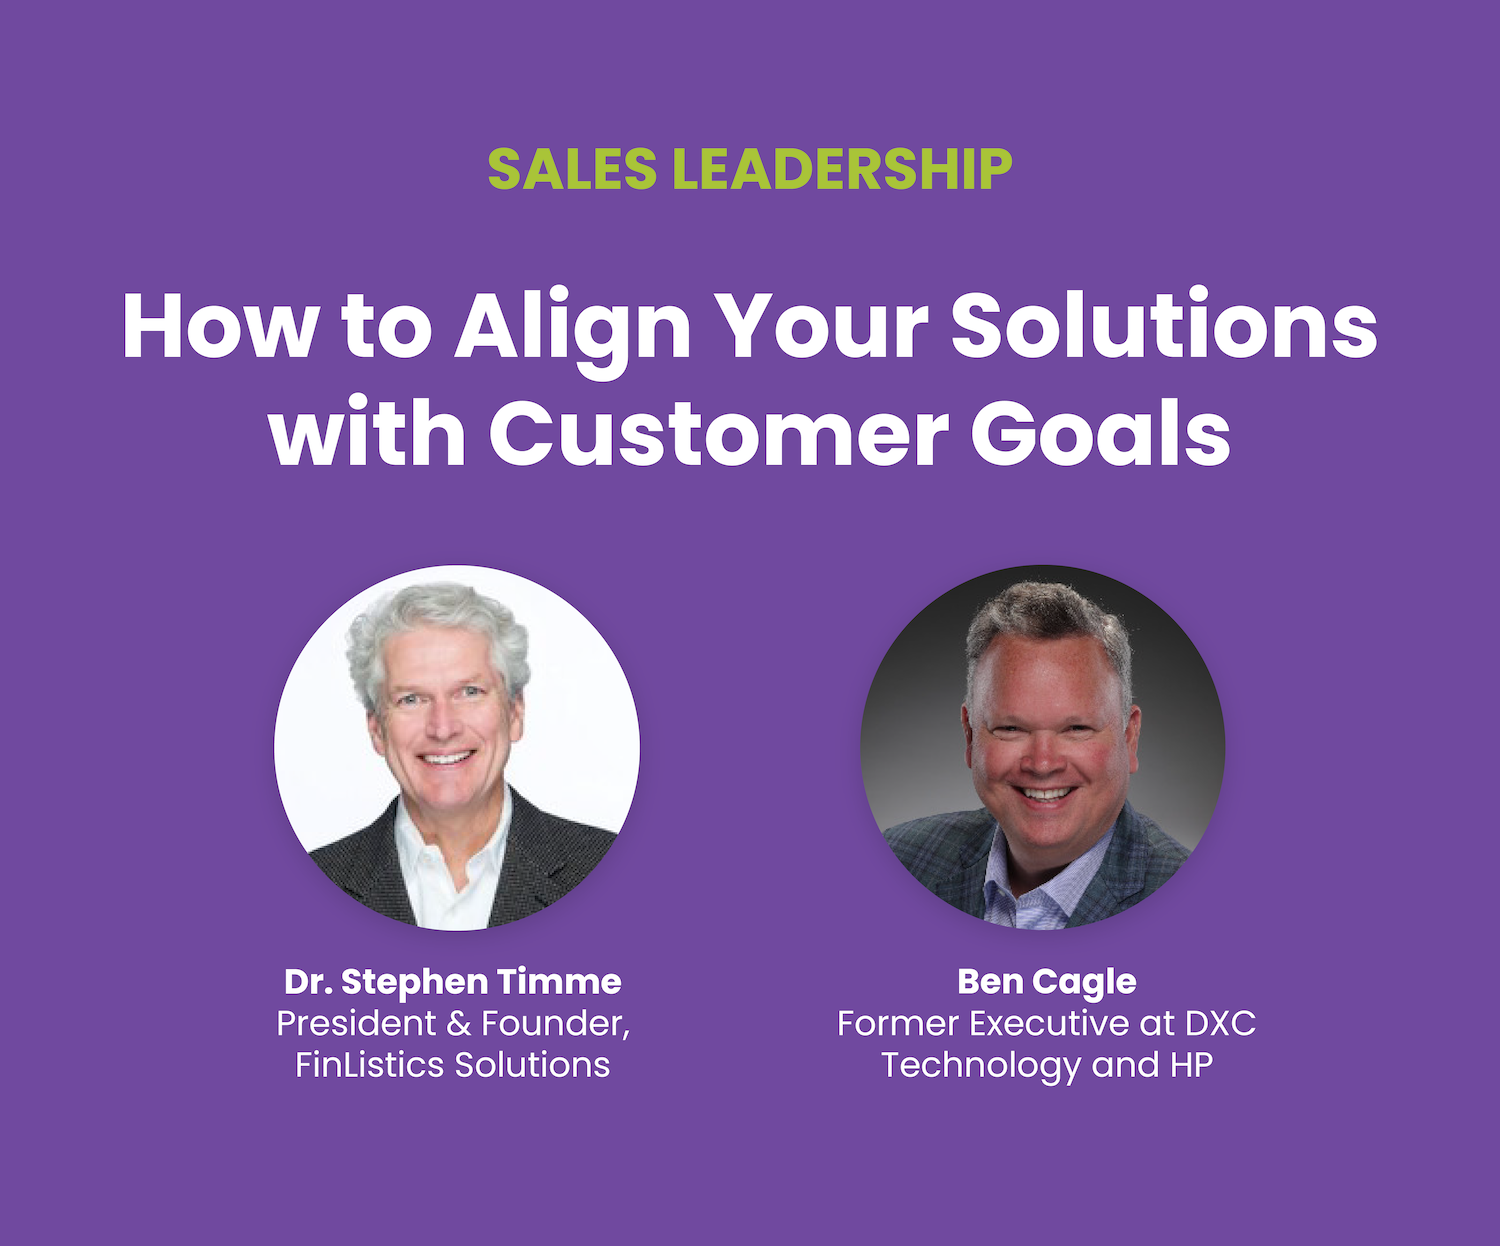 How to Align Your Solutions to Customer Goals